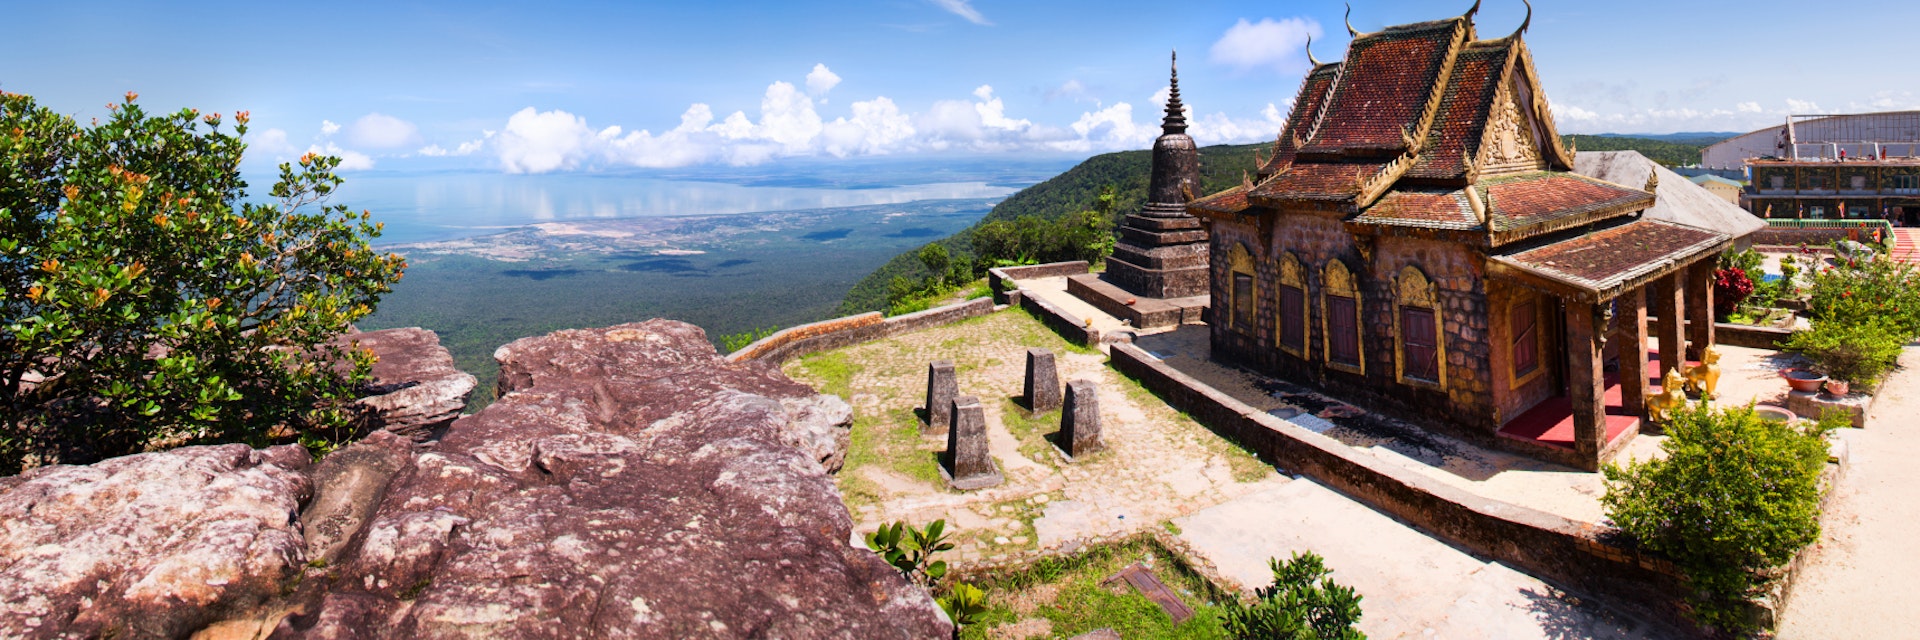 Panorama from Bokor overlooking the pagoda and south Cambodia coast line.